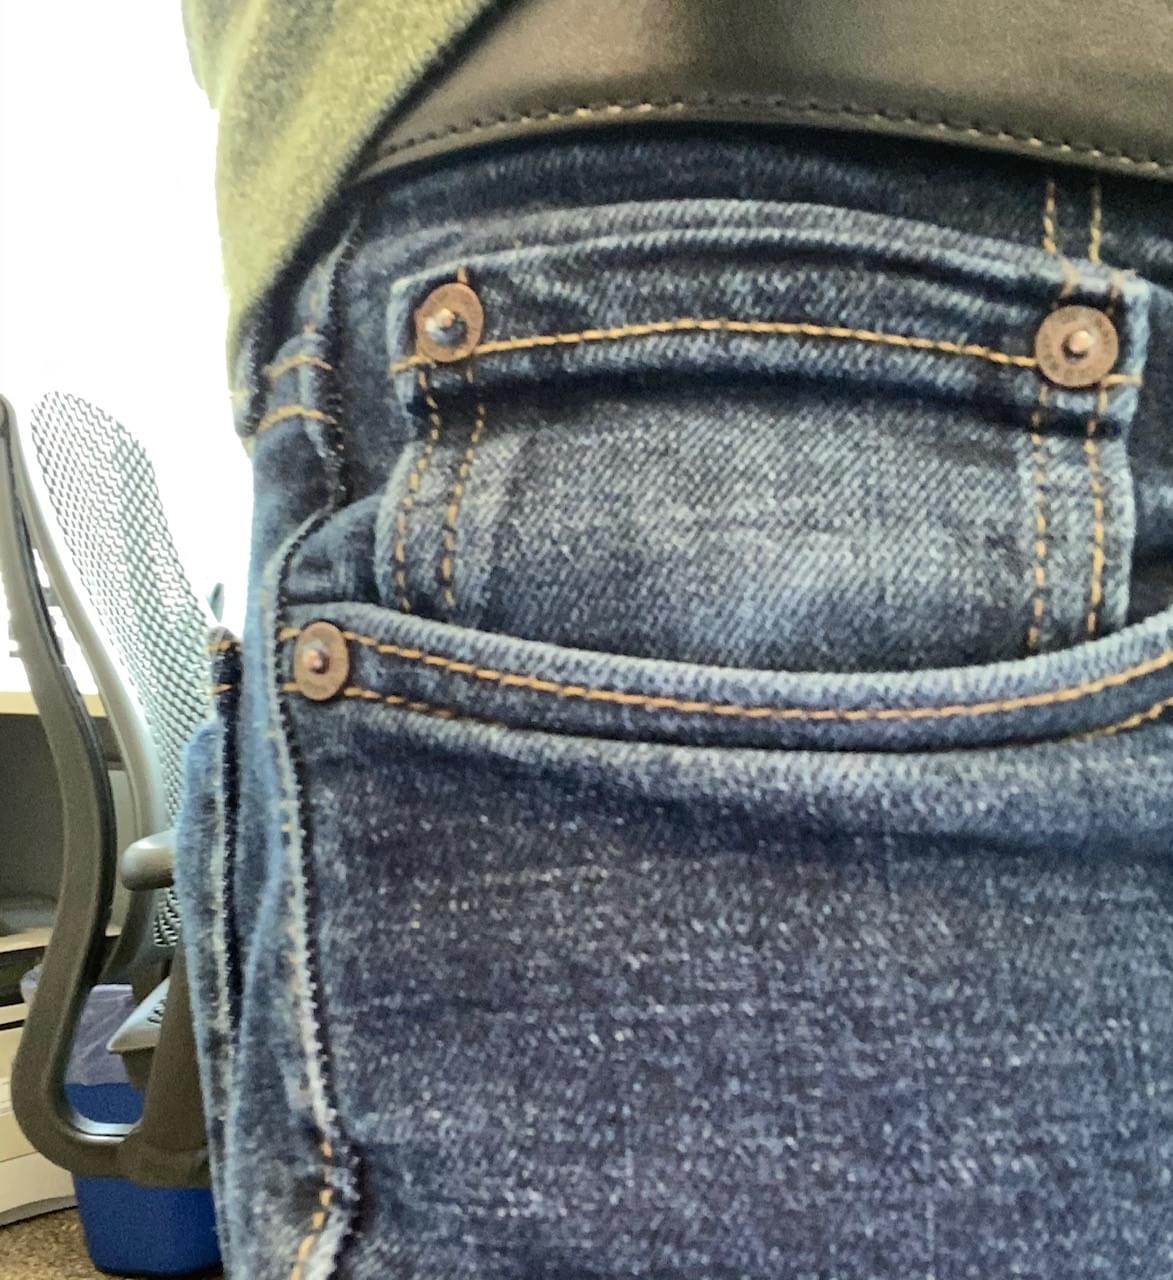 MUNDANE MYSTERIES: Why Do Jeans Have That Little Fifth Pocket?